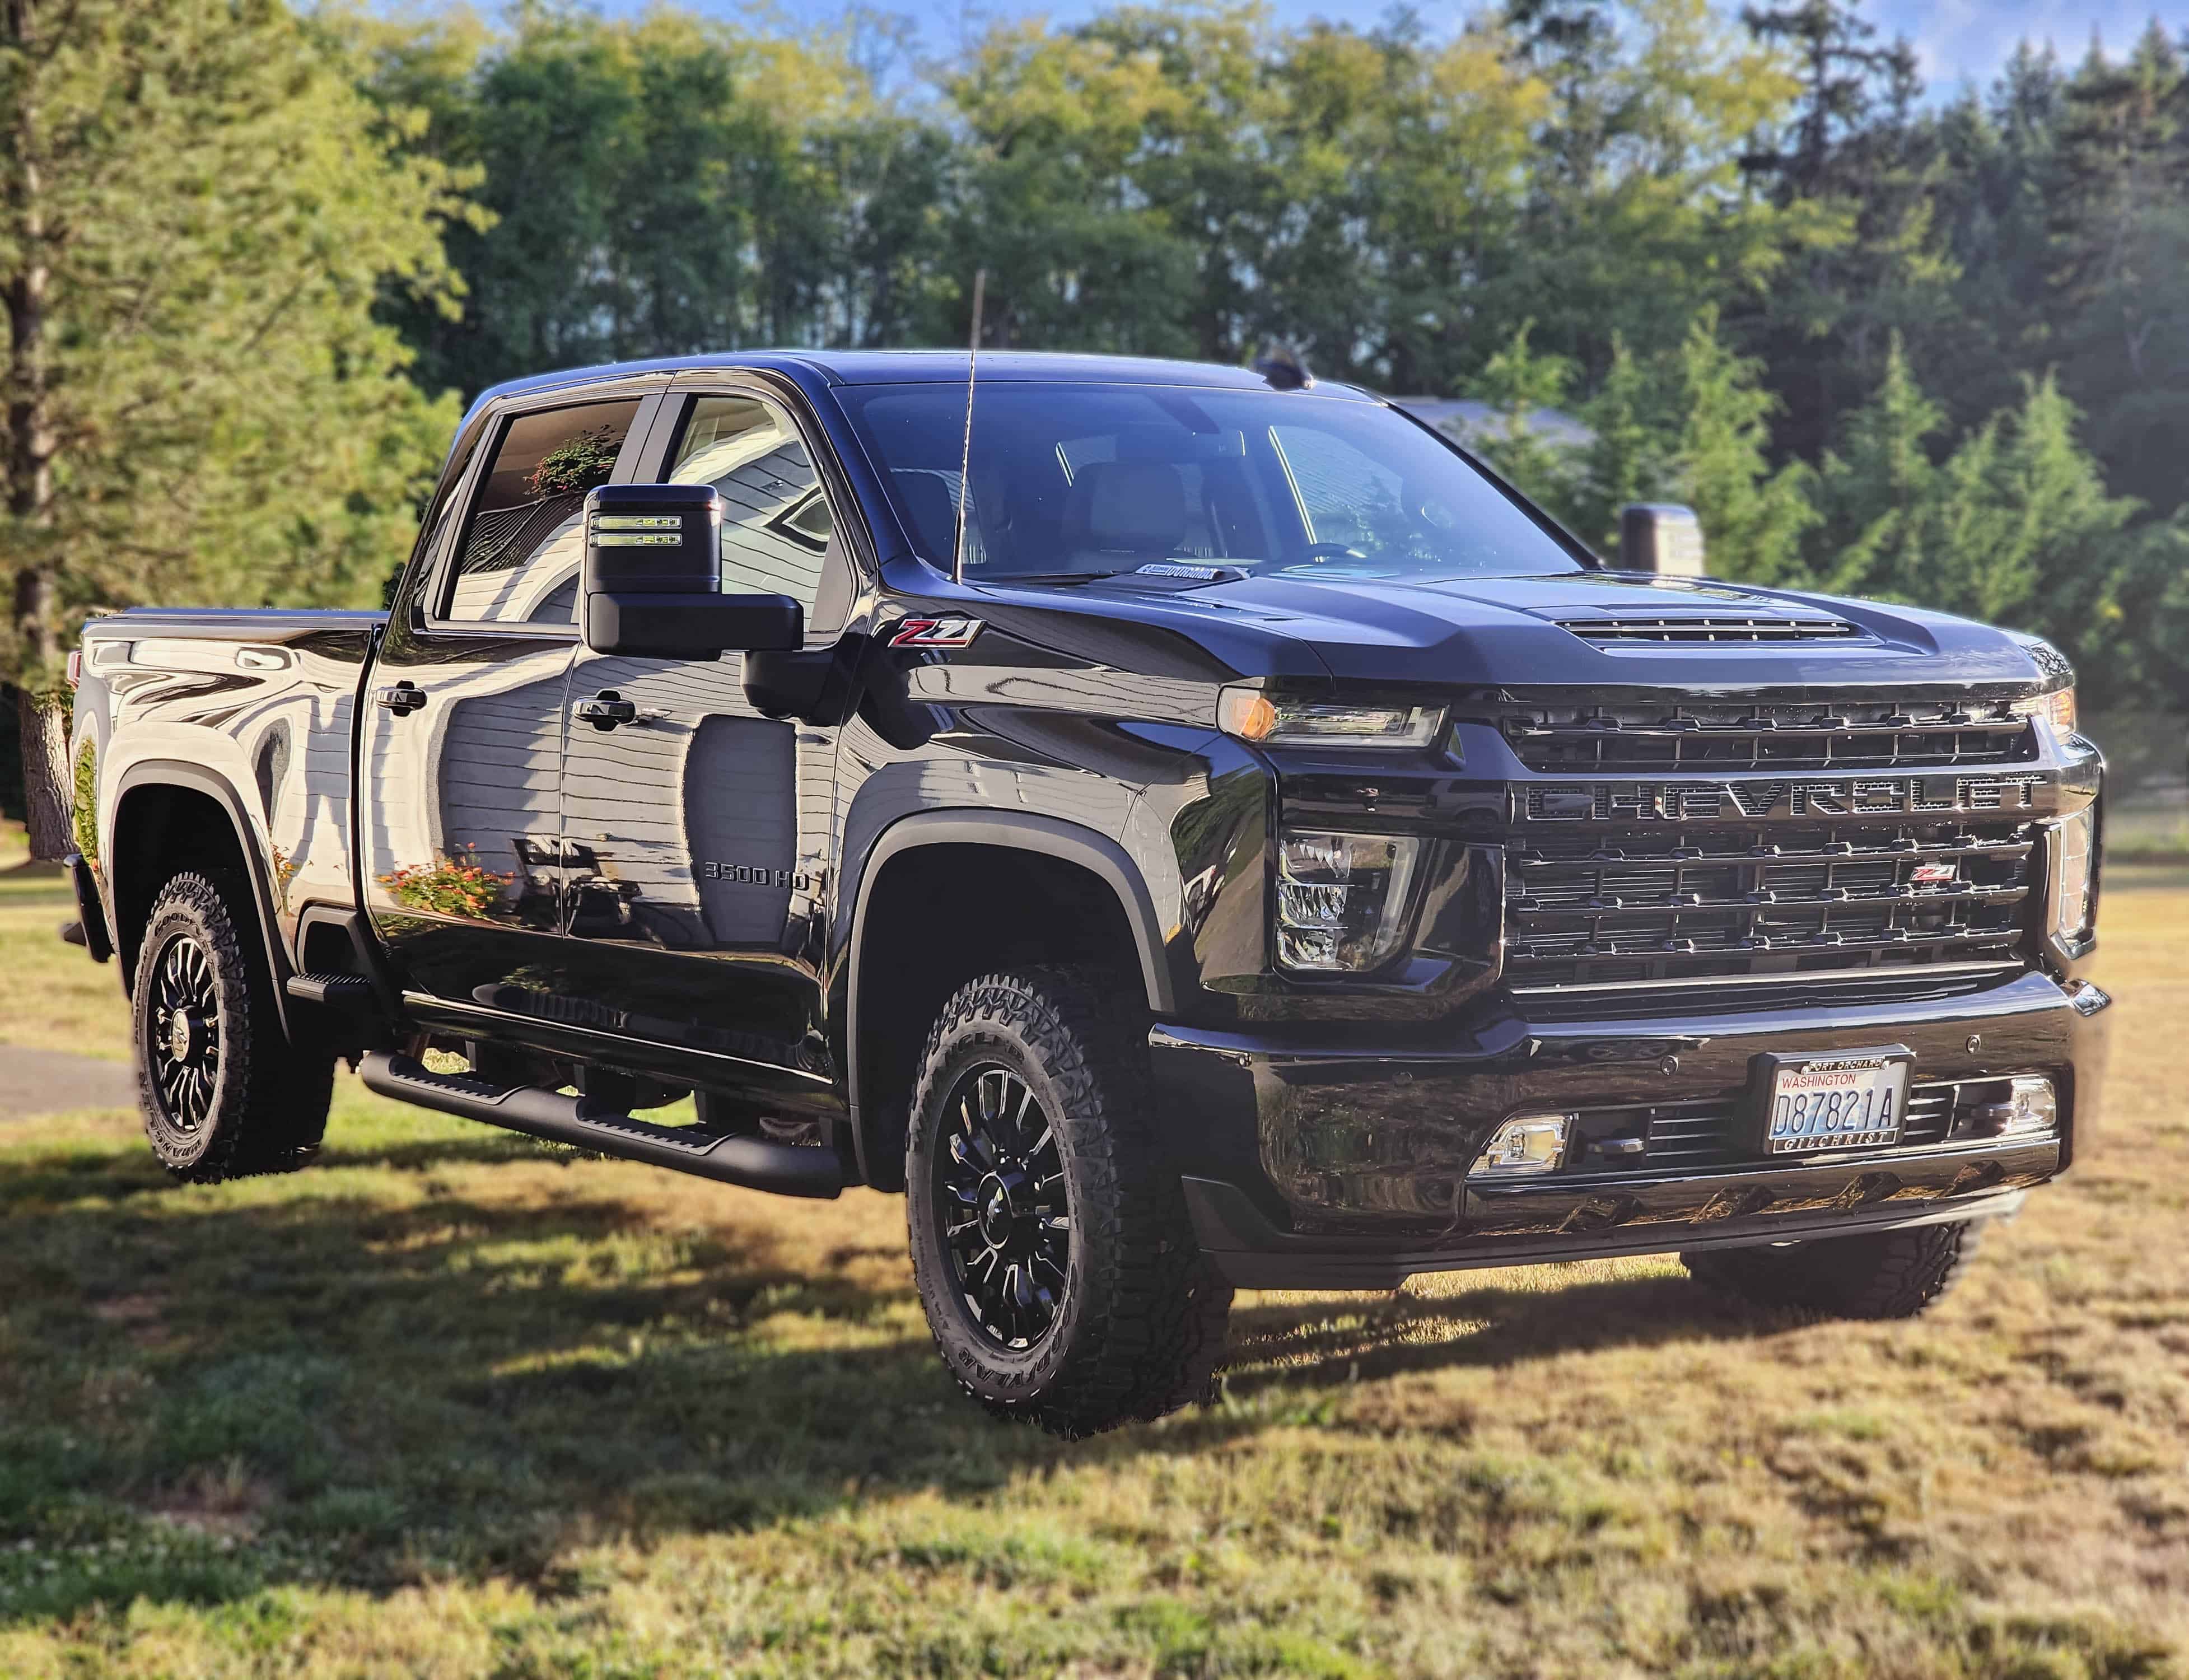 Black Chevrolet Silverado truck showcasing its robust design and off-road tires in a suburban setting.